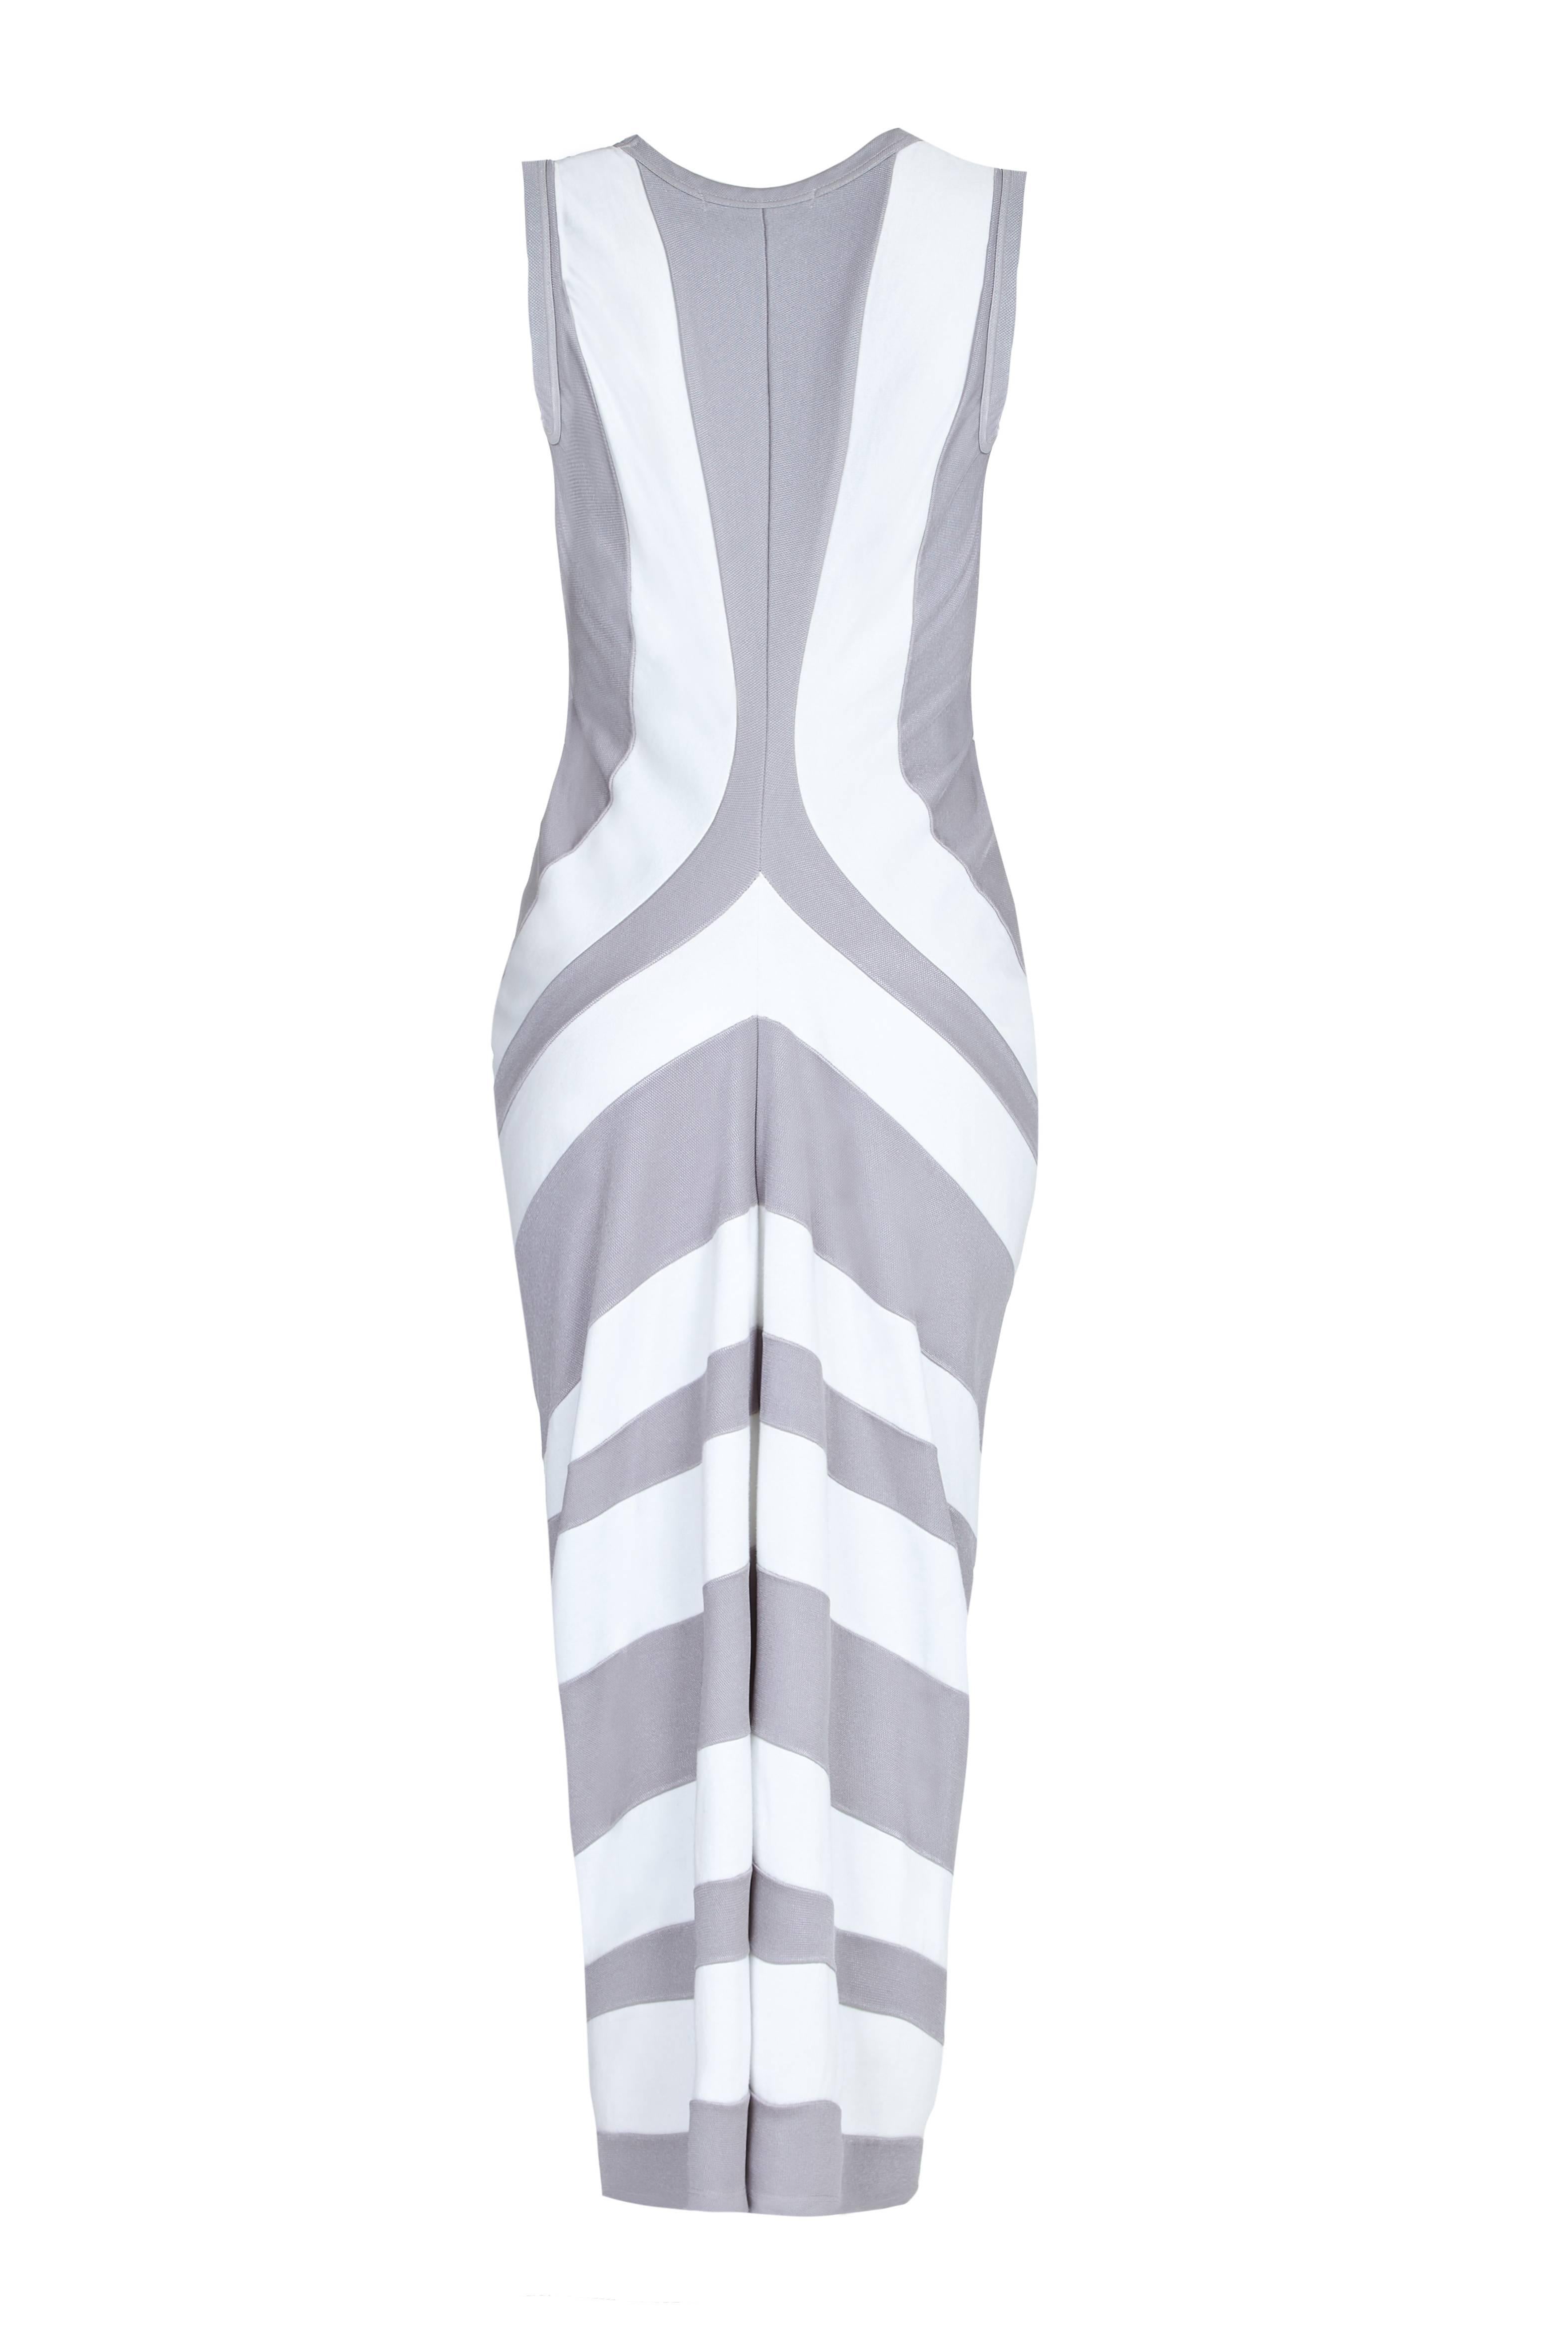 This sensational 2004 striped draped jersey dress is by iconic Japanese label Come Des Garçons and is a beautiful example of the brand's avant garde use of unusual and complex cutting. The cotton/ polyester jersey fabrics are arranged into broad